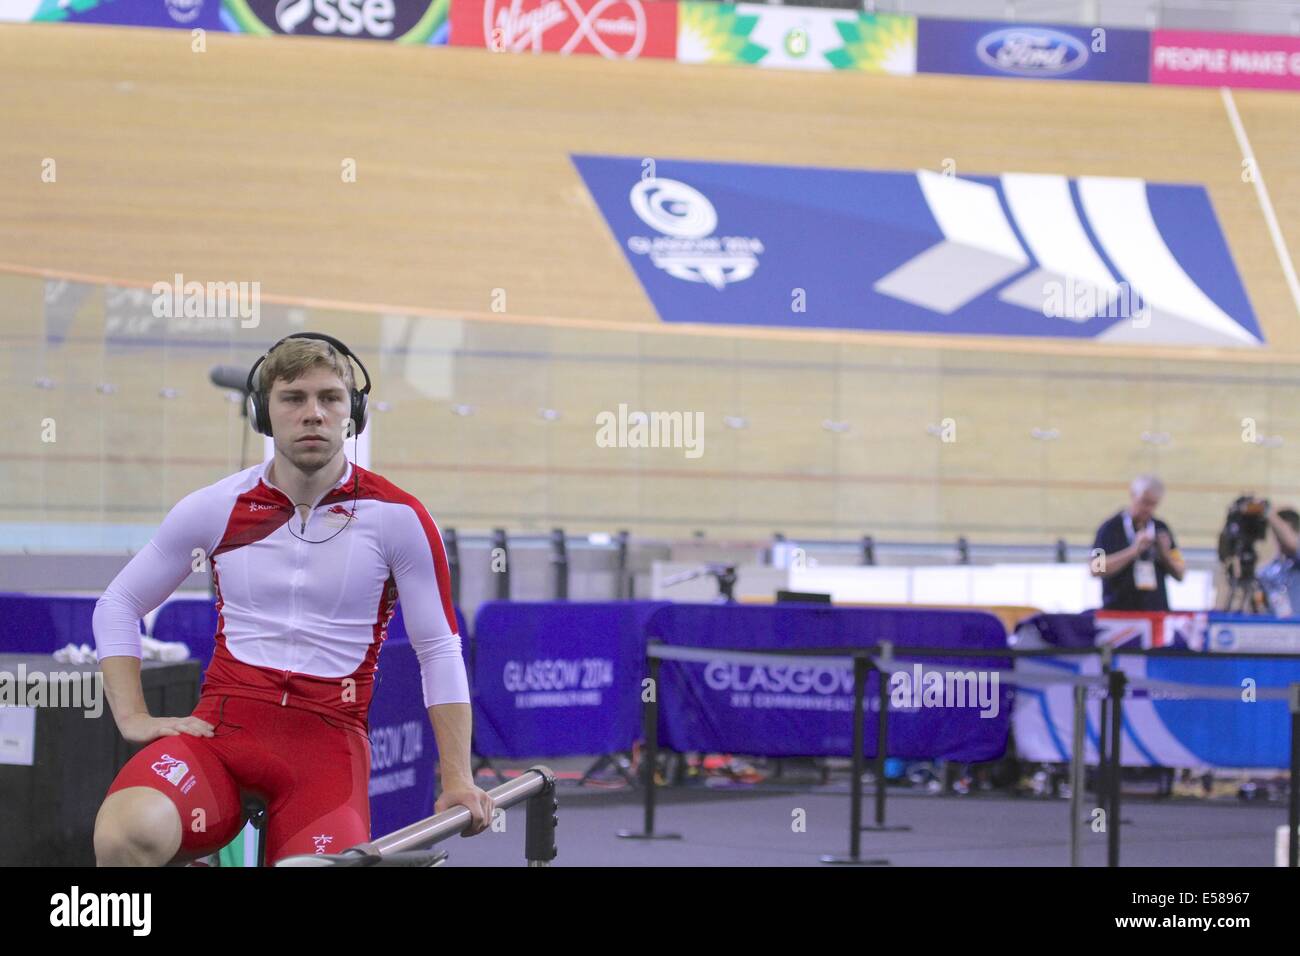 Glasgow, Scotland, UK. 23rd July 2014. The final training session at the Sir Chris Hoy Velodrome before the start of the Commonwealth Games.  Philip Hindes of England warms up Credit:  Neville Styles/Alamy Live News Stock Photo